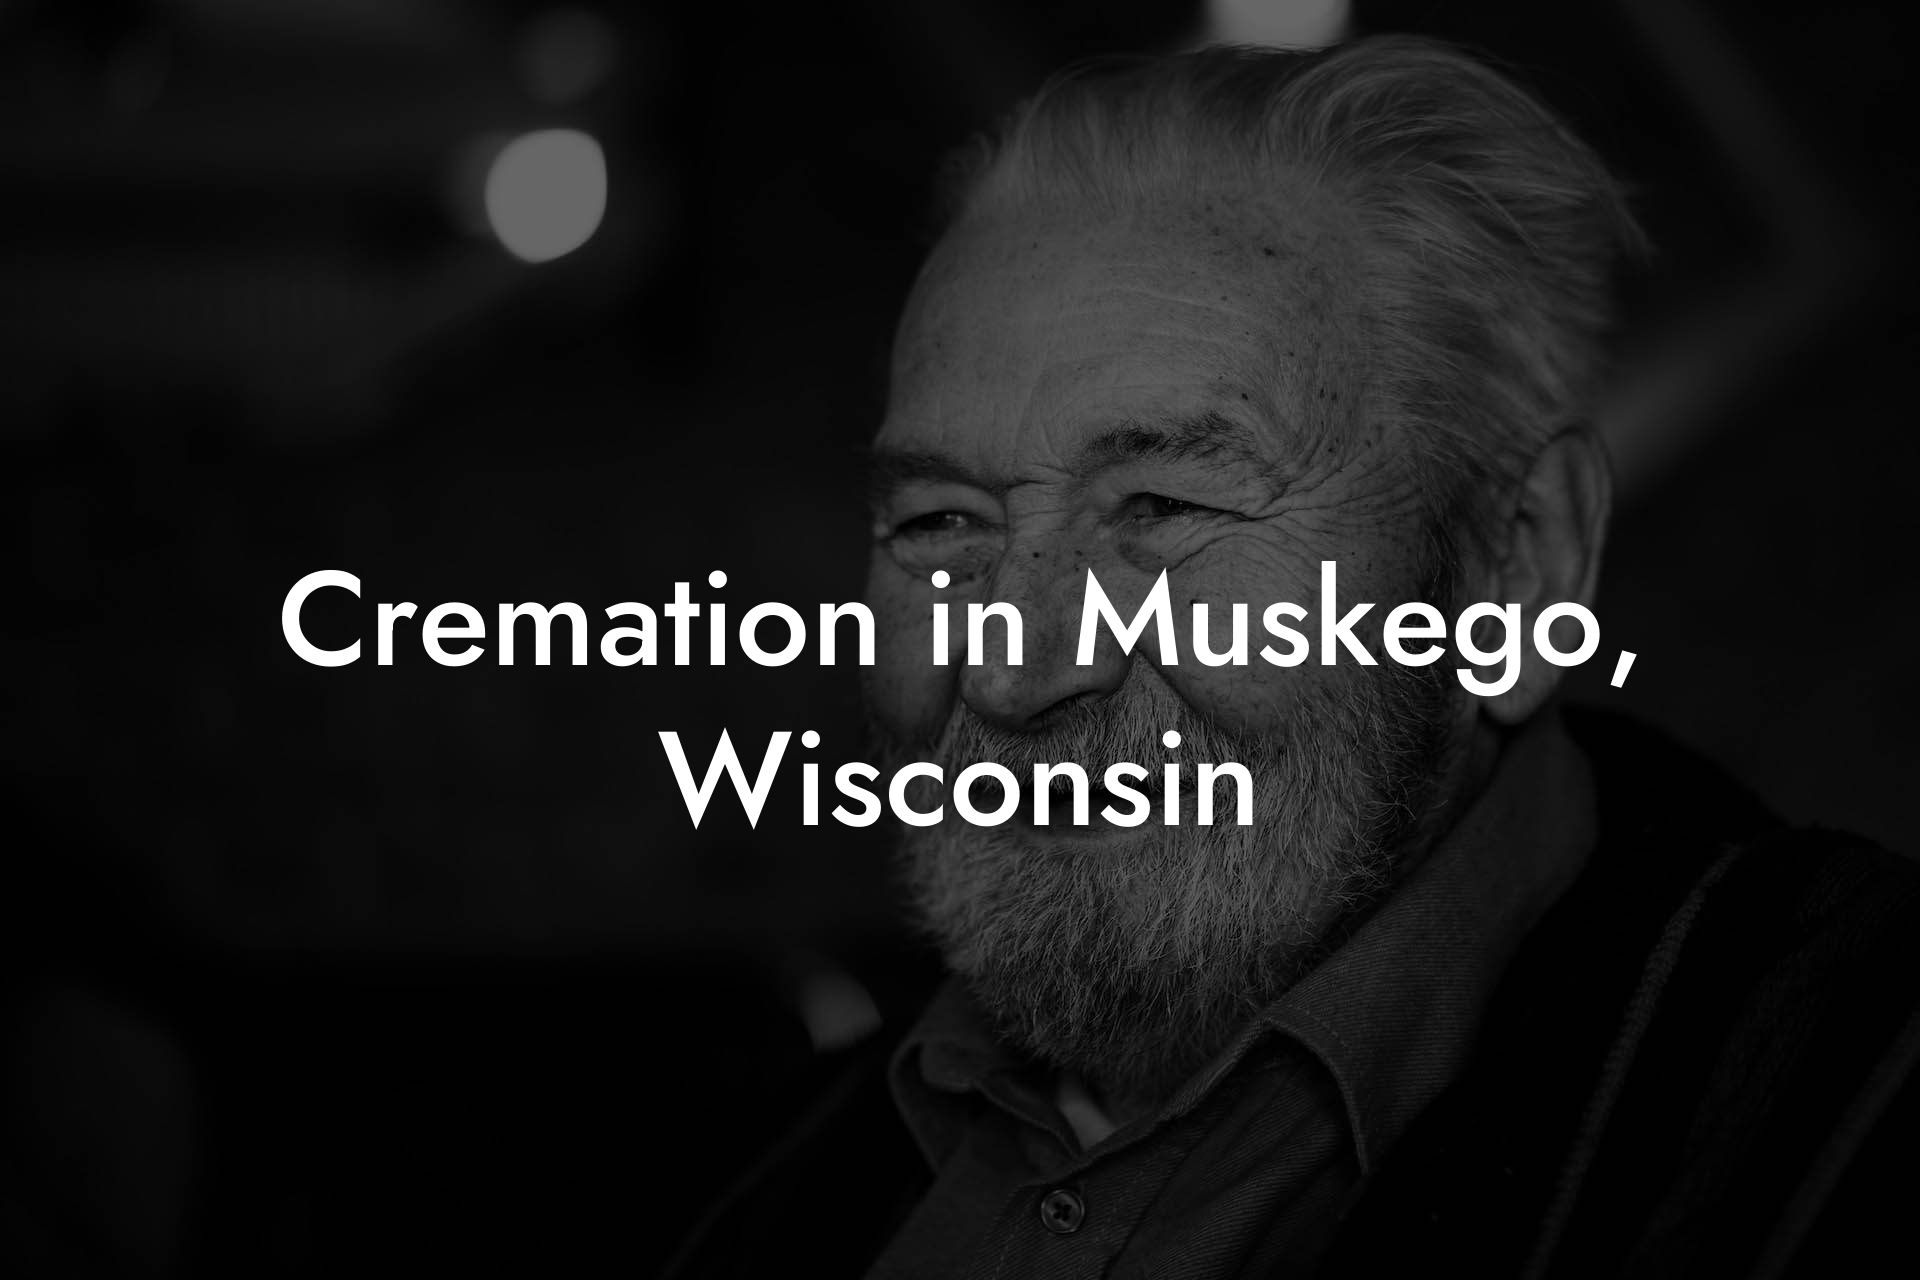 Cremation in Muskego, Wisconsin